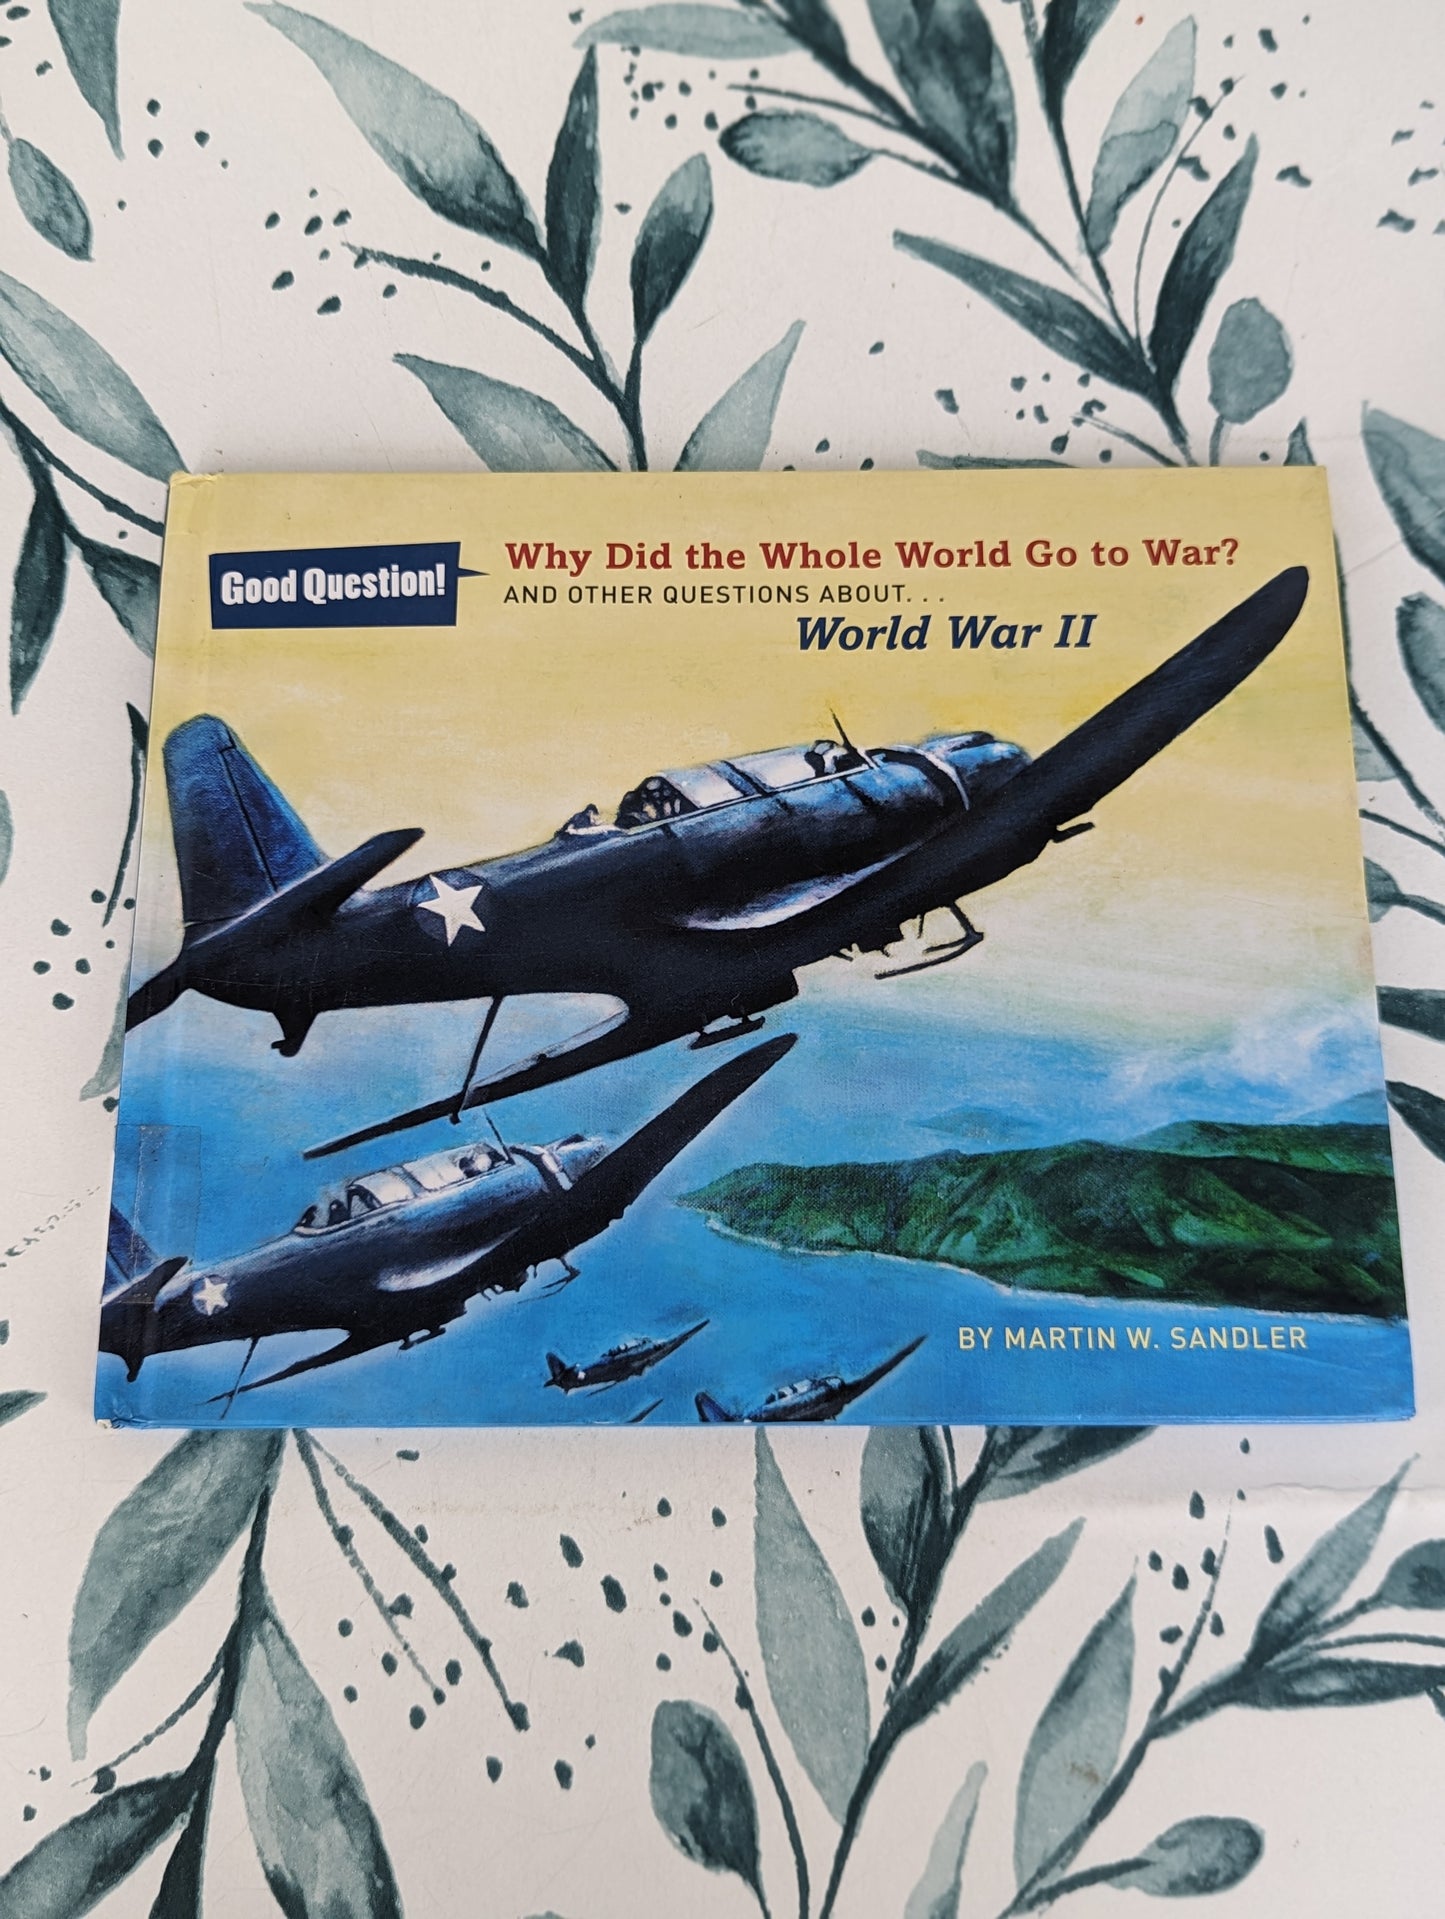 Why Did the Whole World Go To War? And Other Questions about... World War II